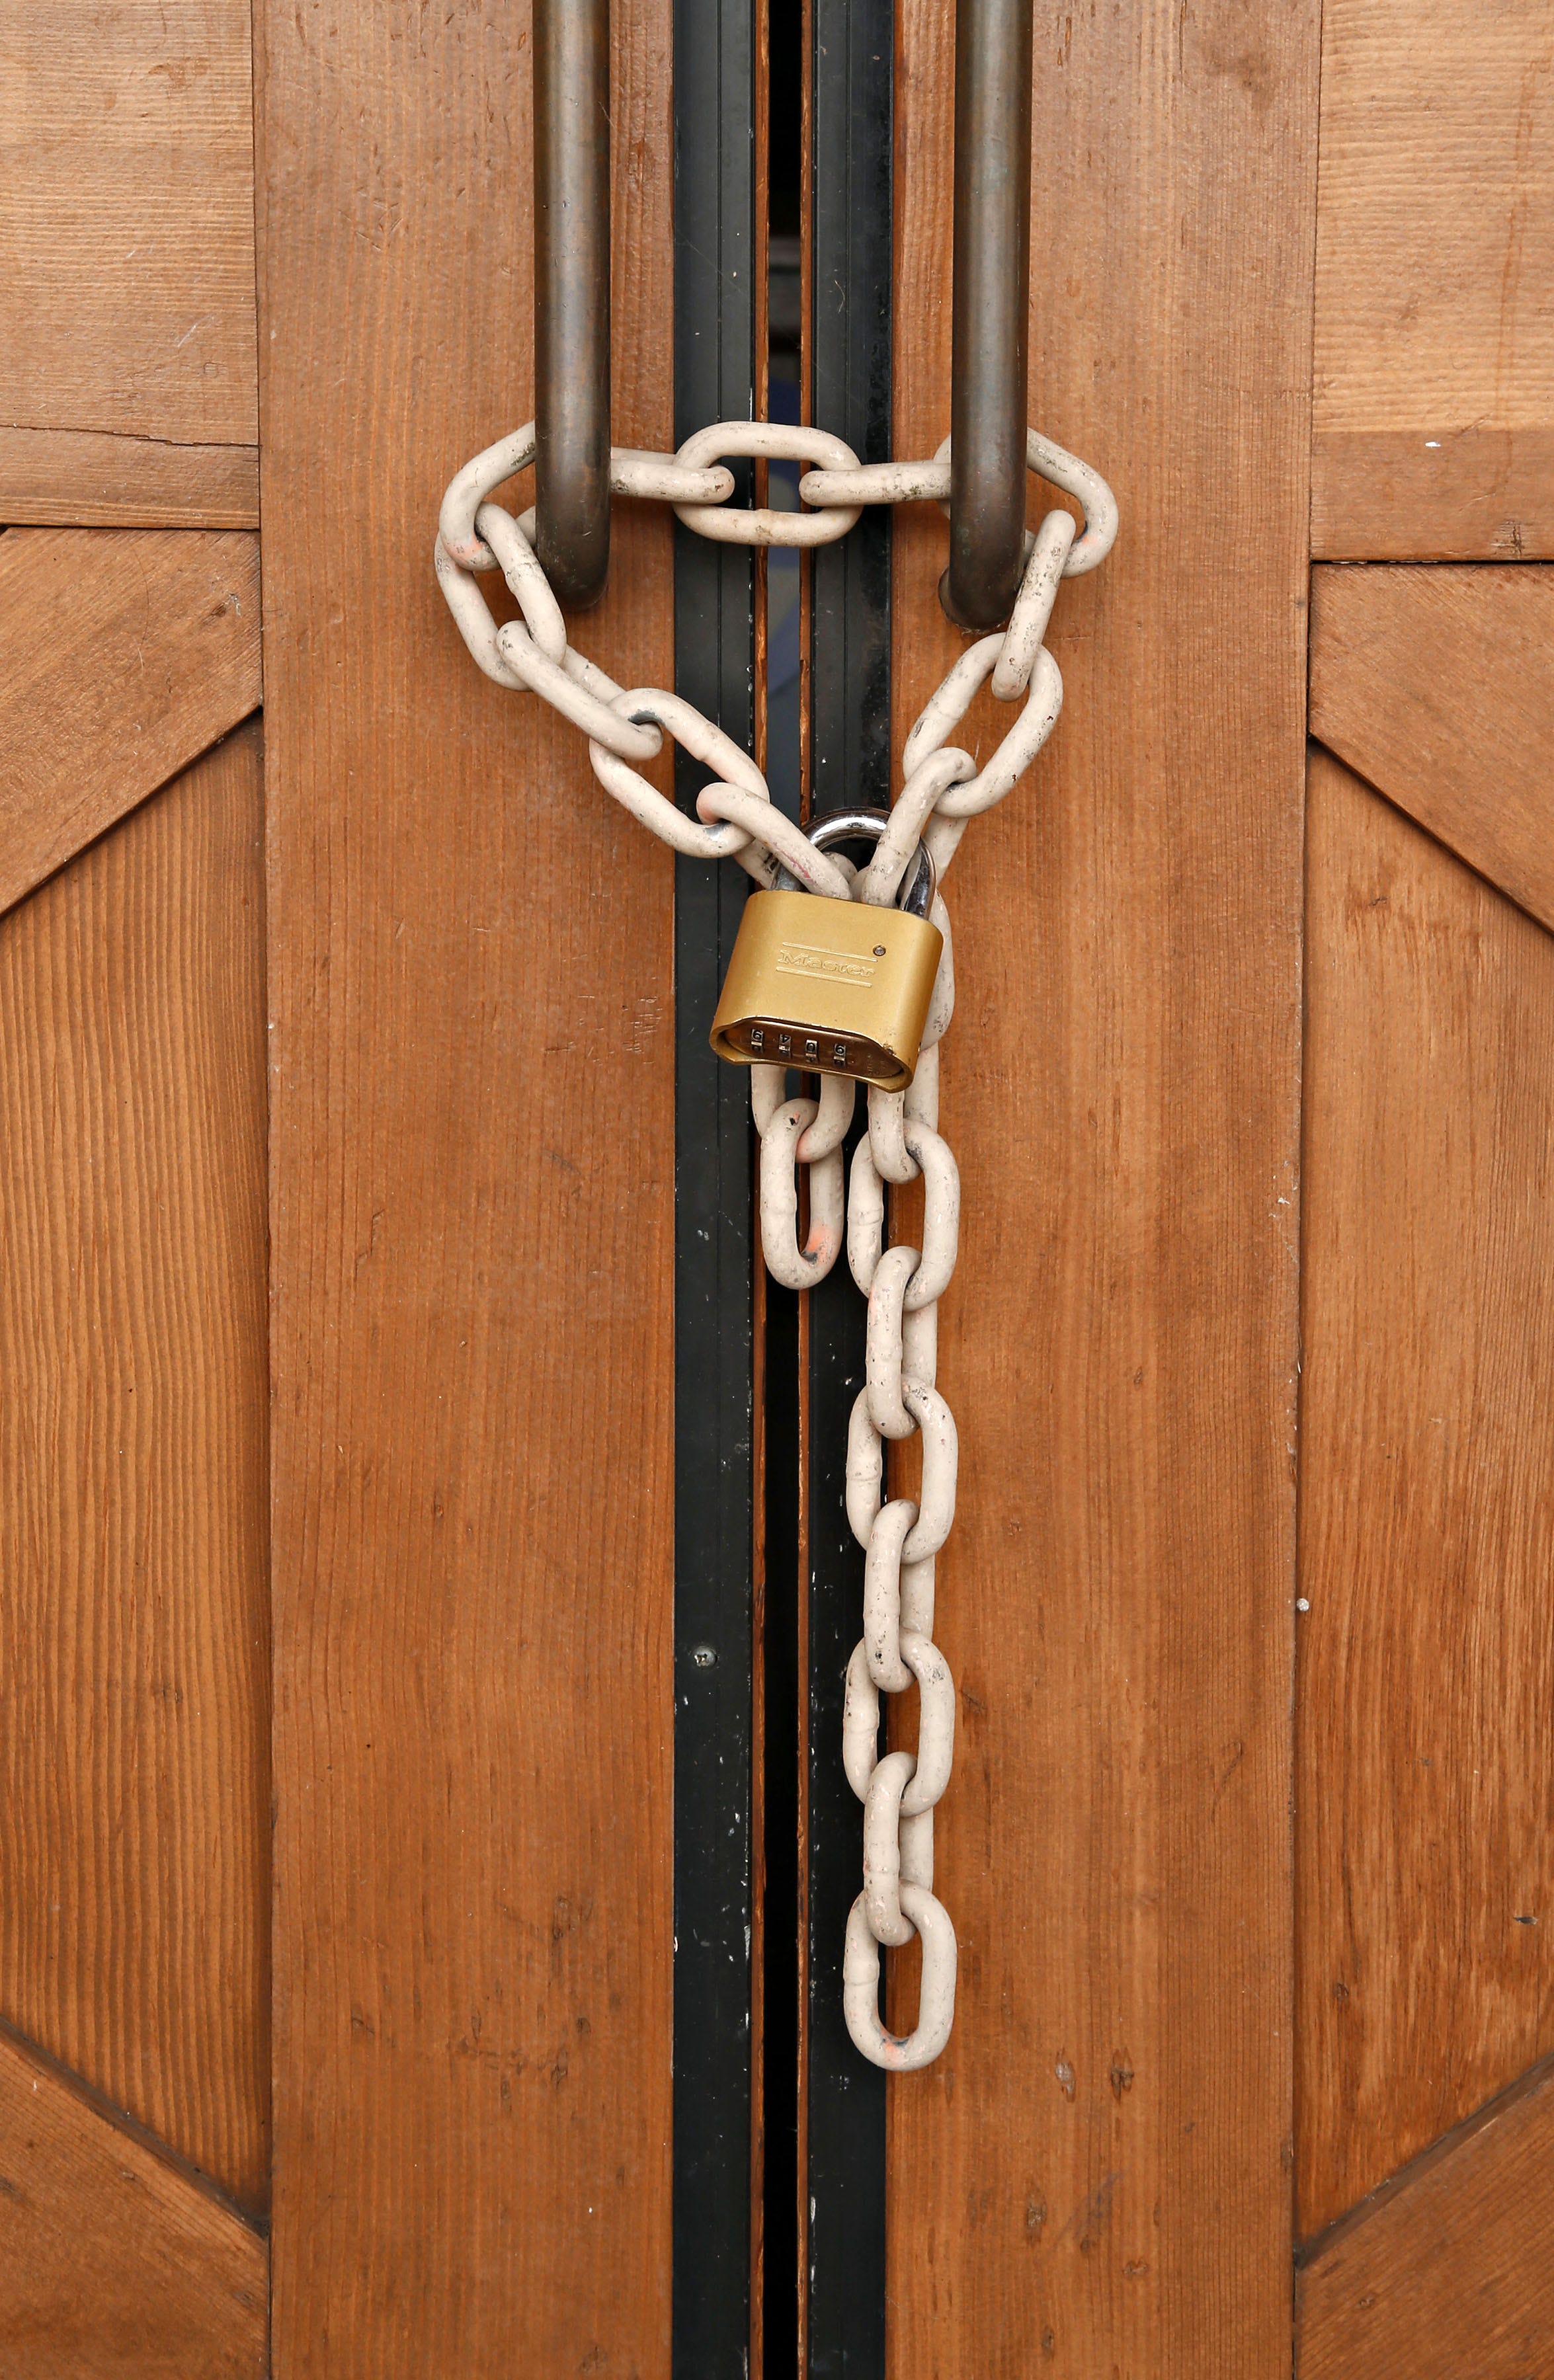 In this September 2015 photo, a chain and a lock secure the doors of a long-shuttered Toby Keith's I Love This Bar and Grill in Mesa.